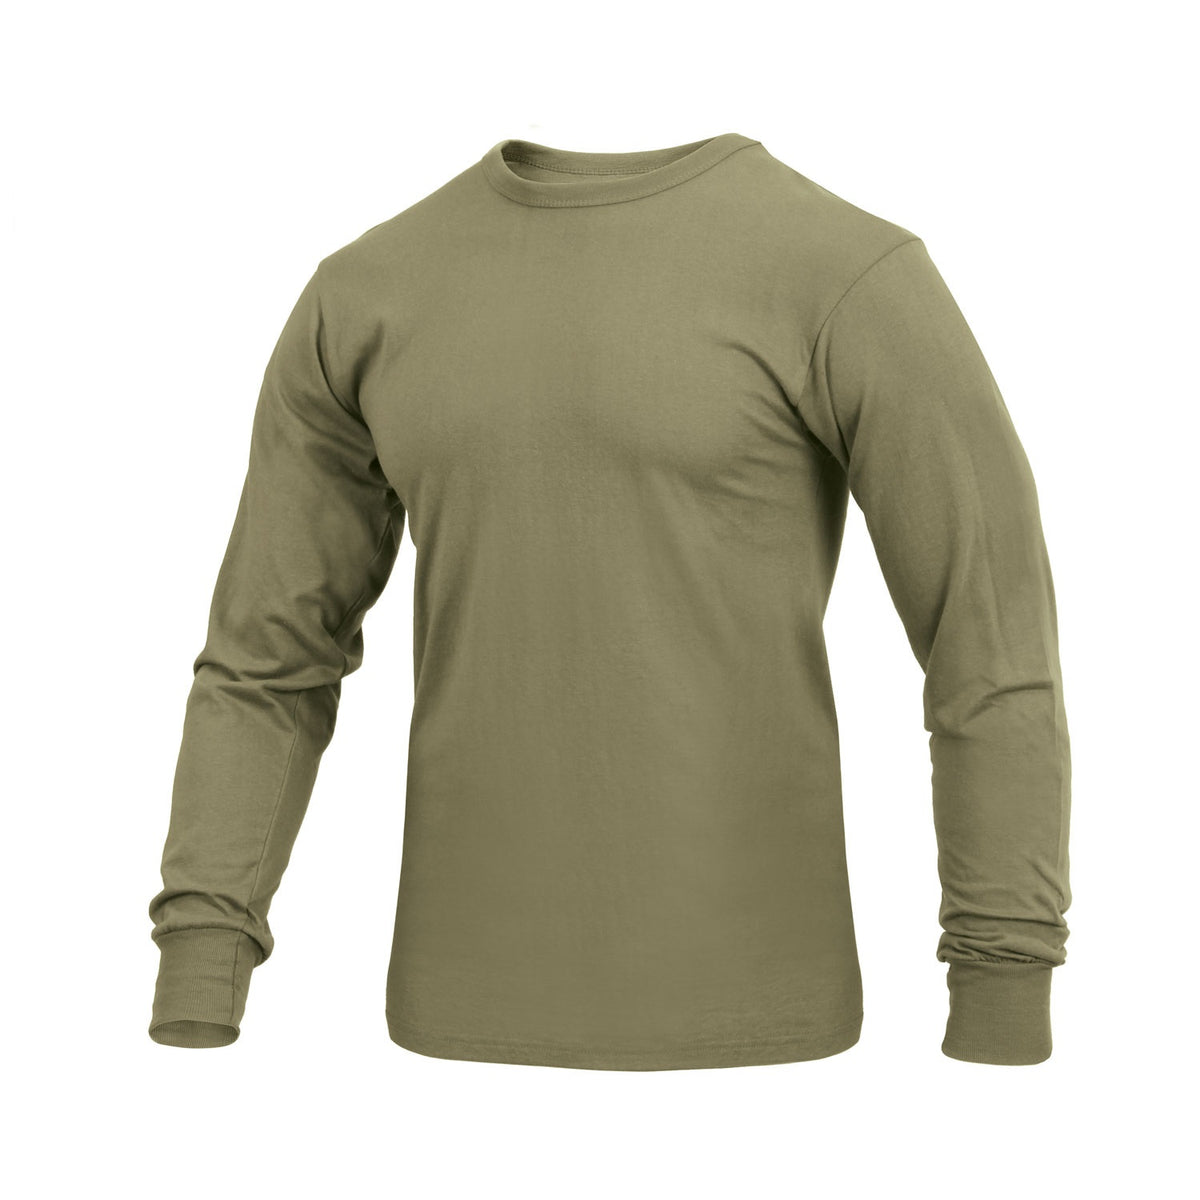 Rothco Long Sleeve Solid T-Shirt Coyote Brown